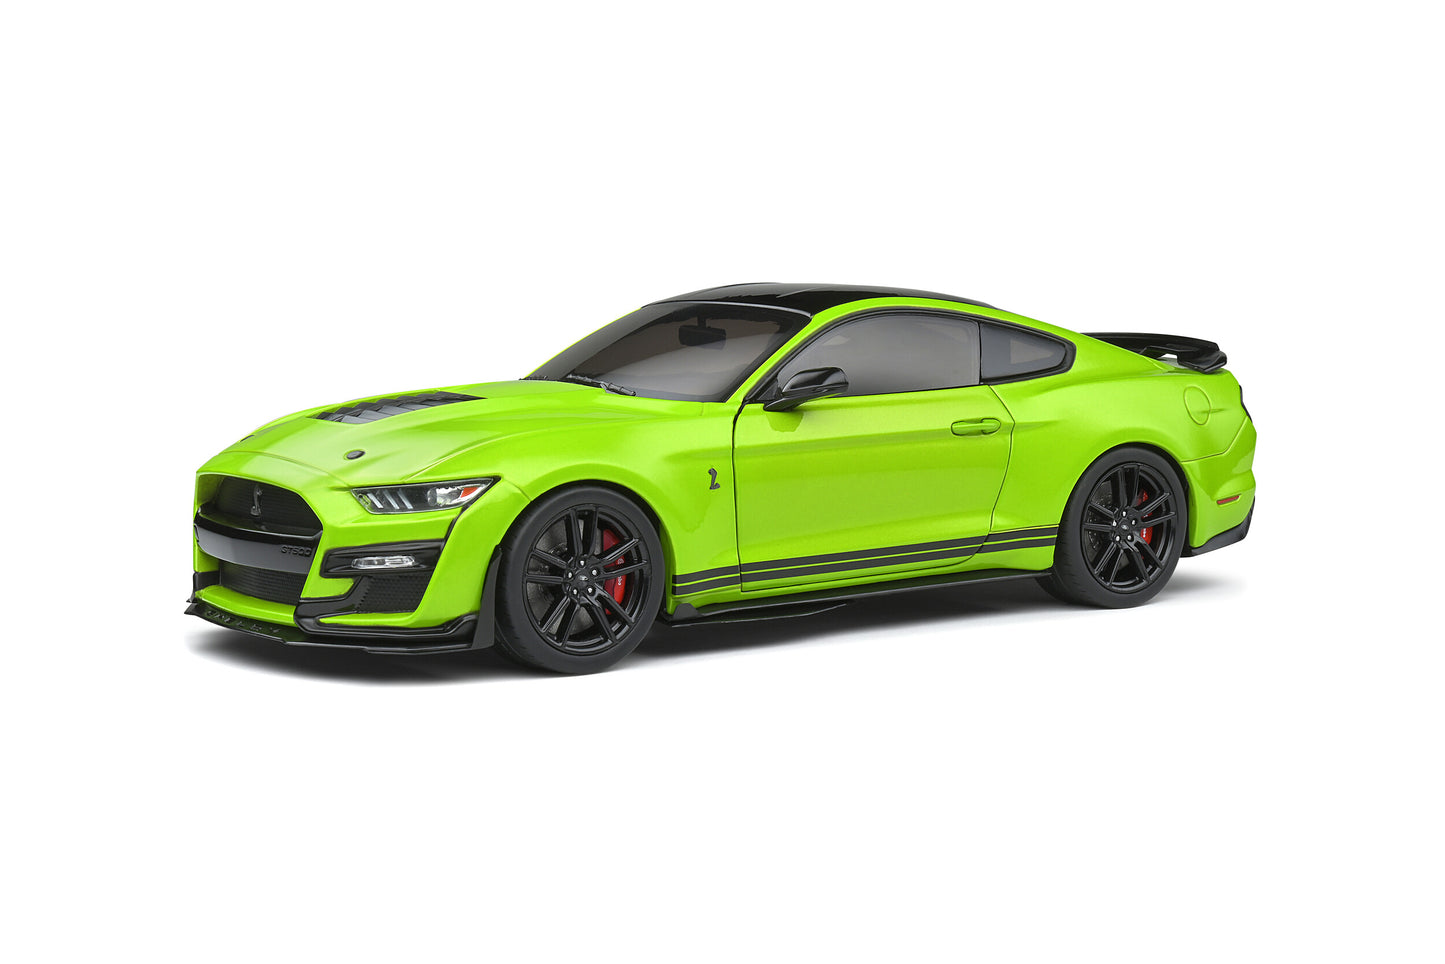 Solido - Ford Shelby GT500 (Grabber Lime) 1:18 Scale Model Car